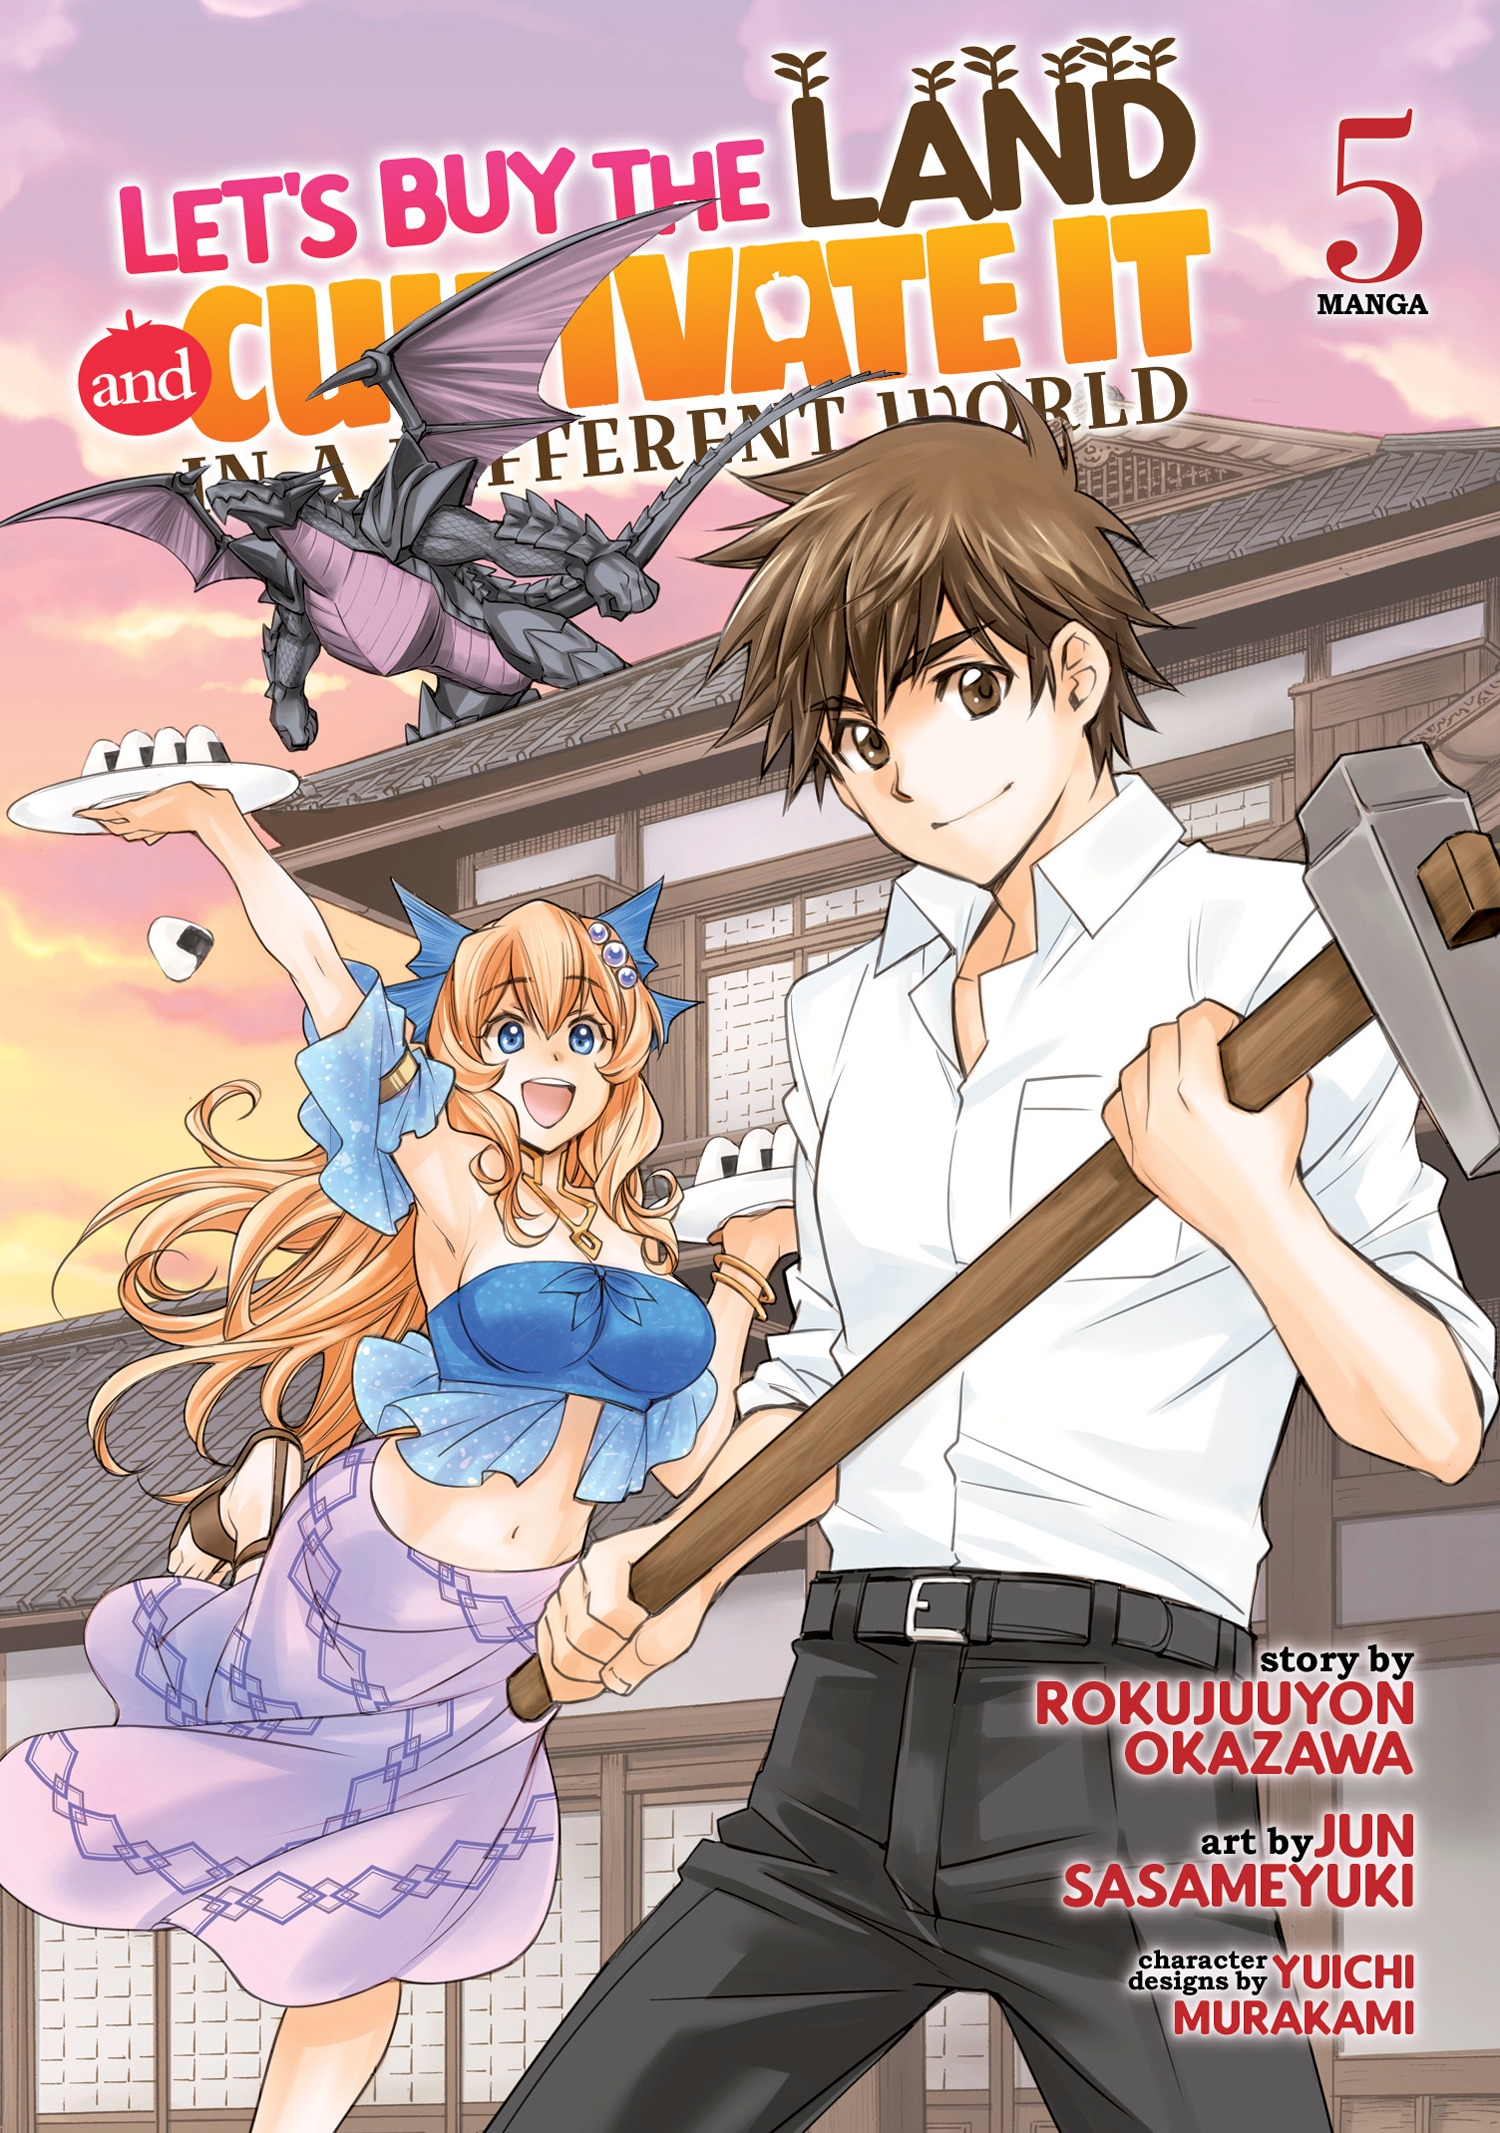 Let\u0026#39;s Buy the Land and Cultivate It in a Different World (Manga) Vol. 5 ...